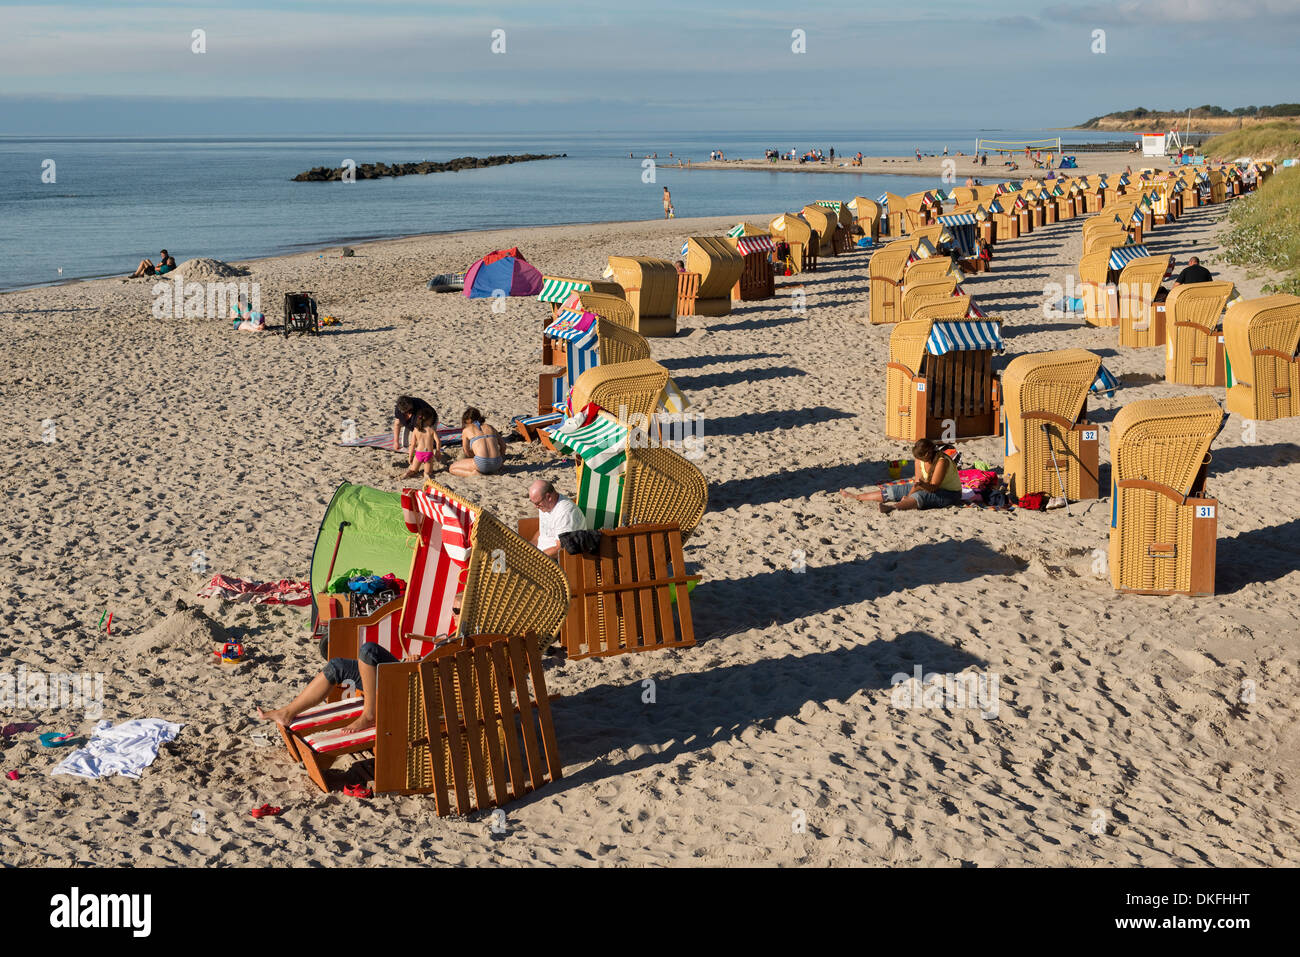 Baltic Sea, beach and wicker beach chairs, Wustrow resort, Mecklenburg-Vorpommern, Germany Stock Photo